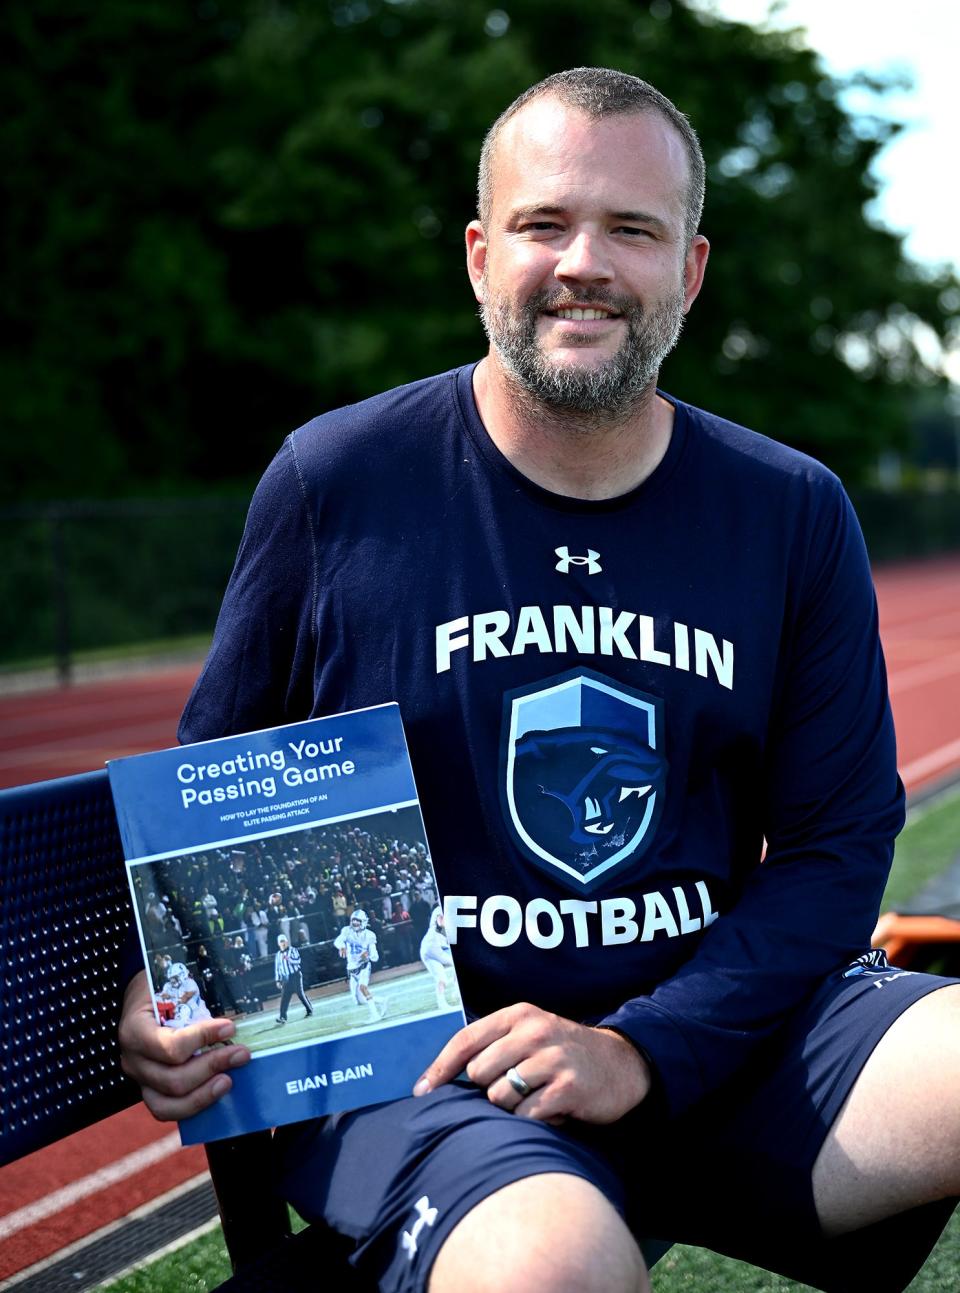 Franklin football coach Eian Bain with a copy of his book, "Creating Your Passing Game," Aug. 19, 2022.